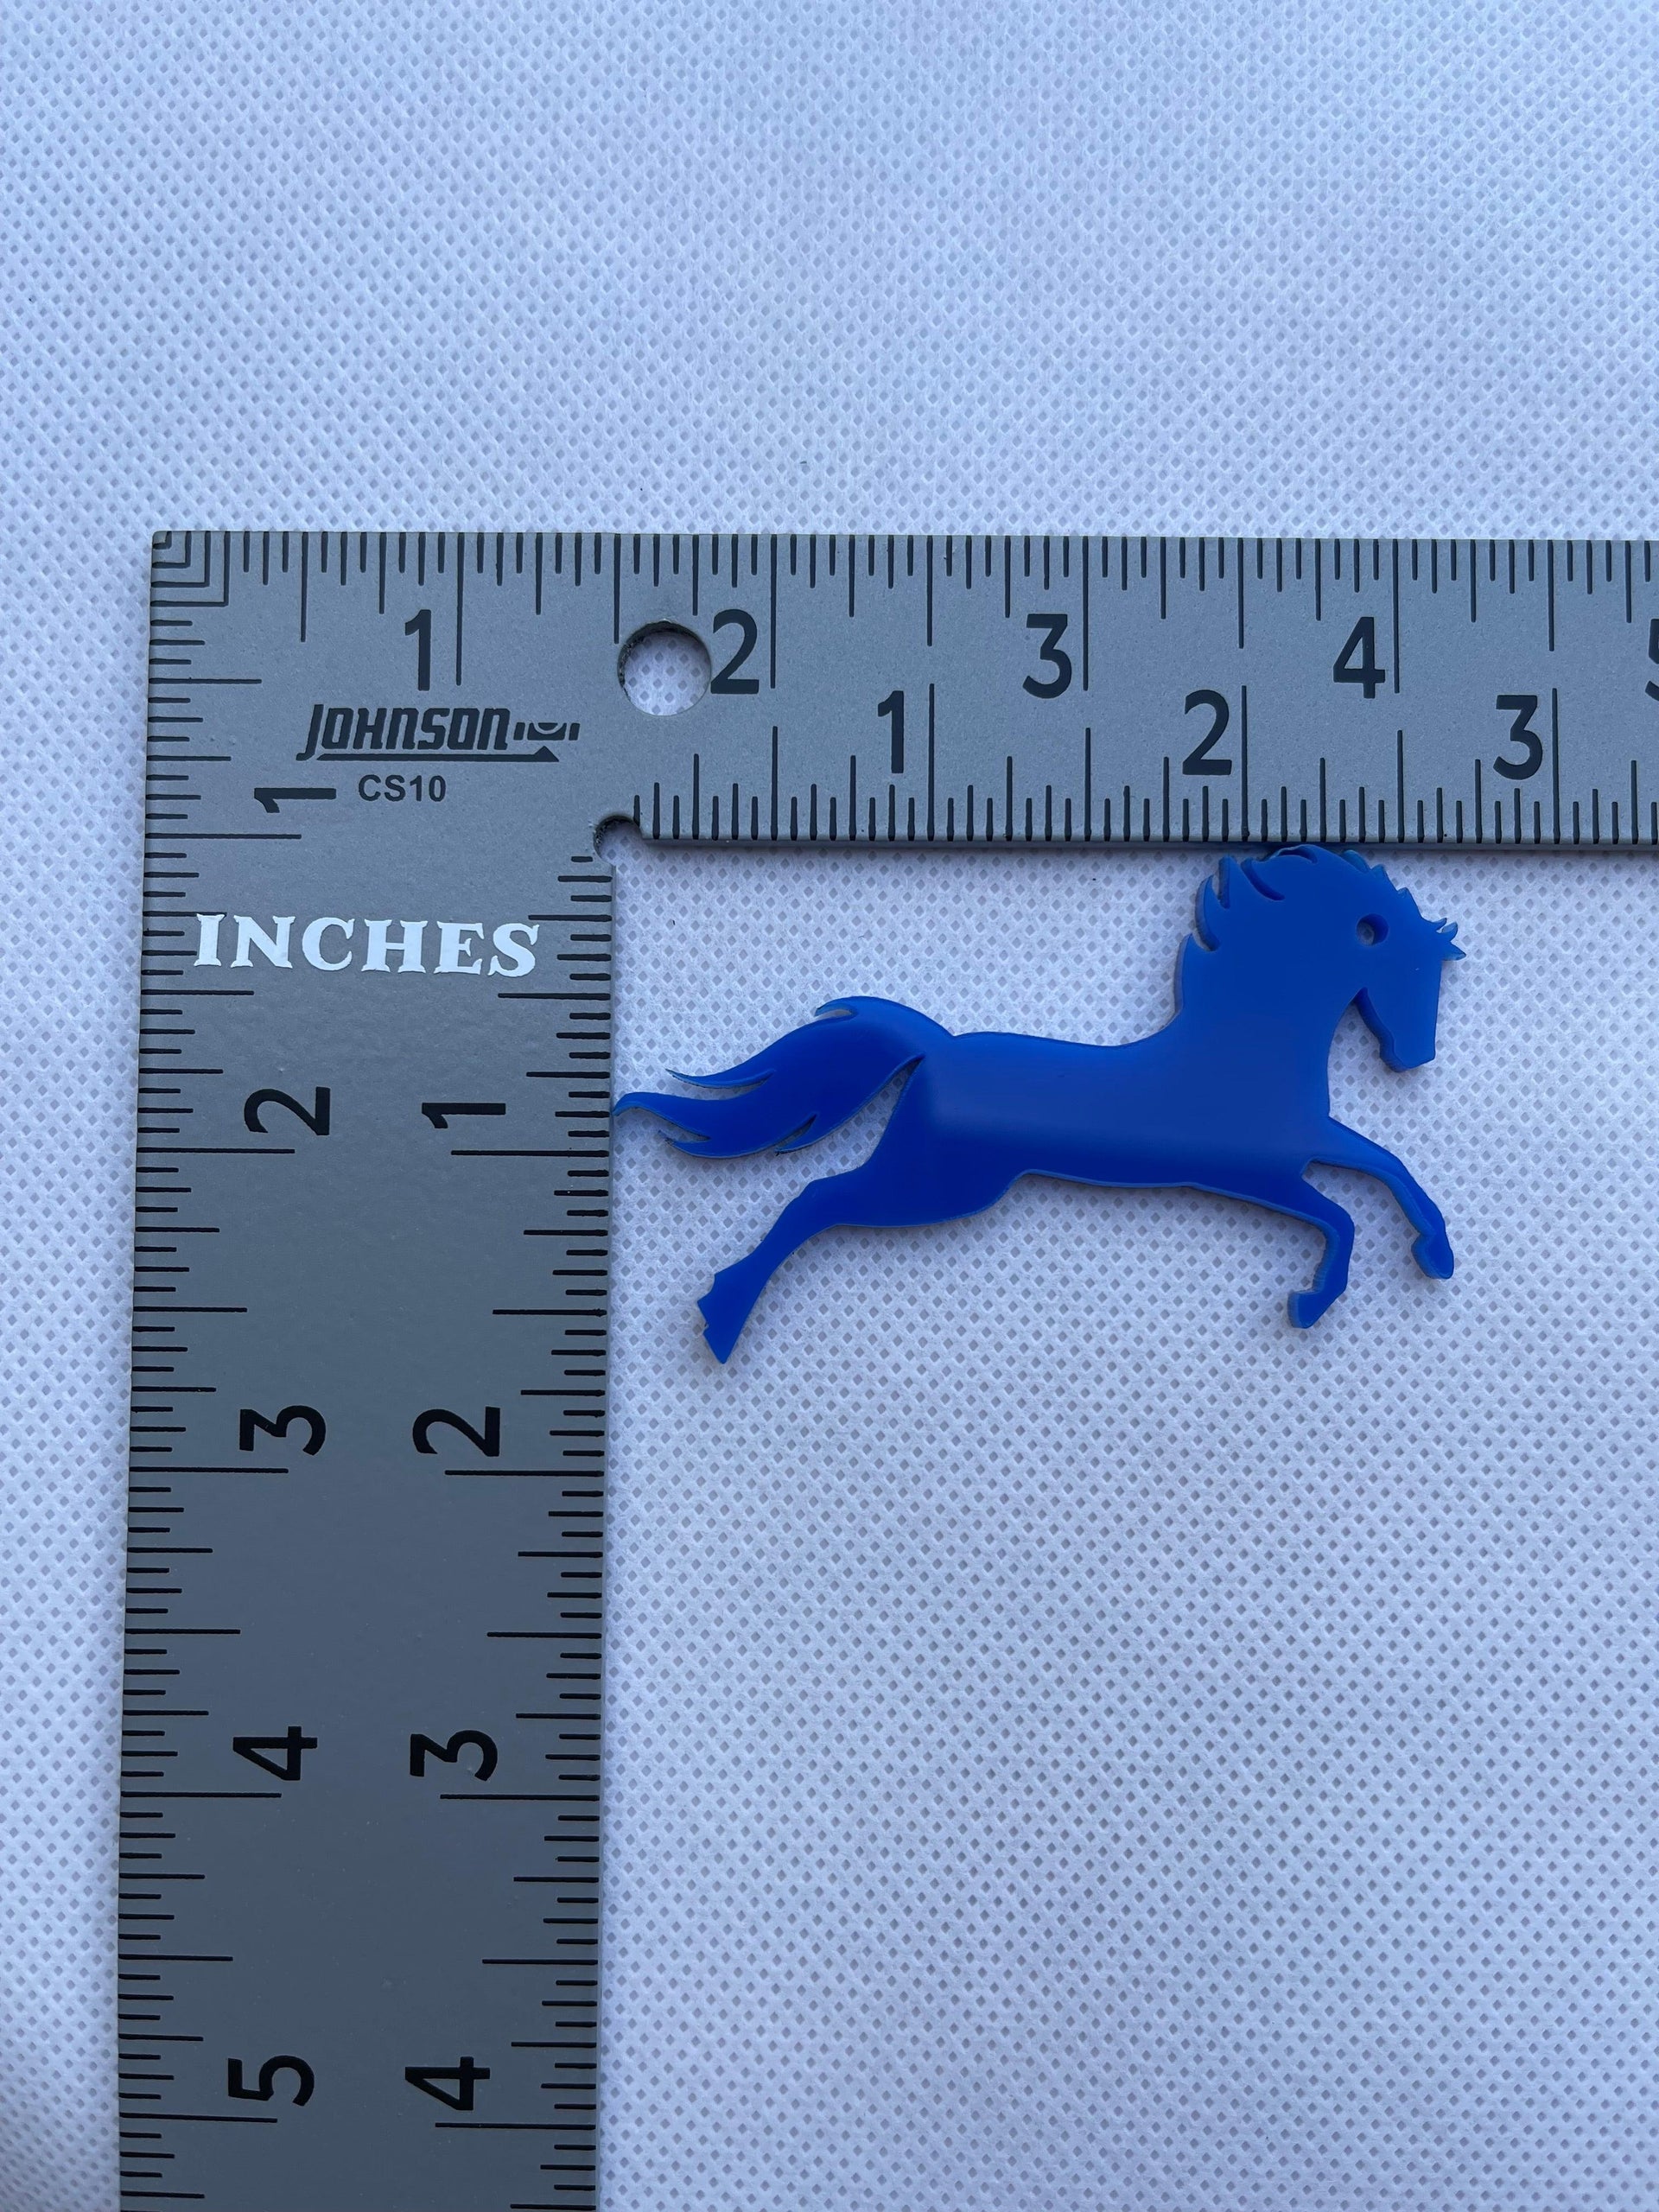 Horse Mold for Resin - Resin Molds - Mold for Jewelry Making - Keychain Earrings Molds - Horse Silicone Mold - Mold for Epoxy Resin - Animal Molds - Horse - Art By Suleny Craft Store LLC